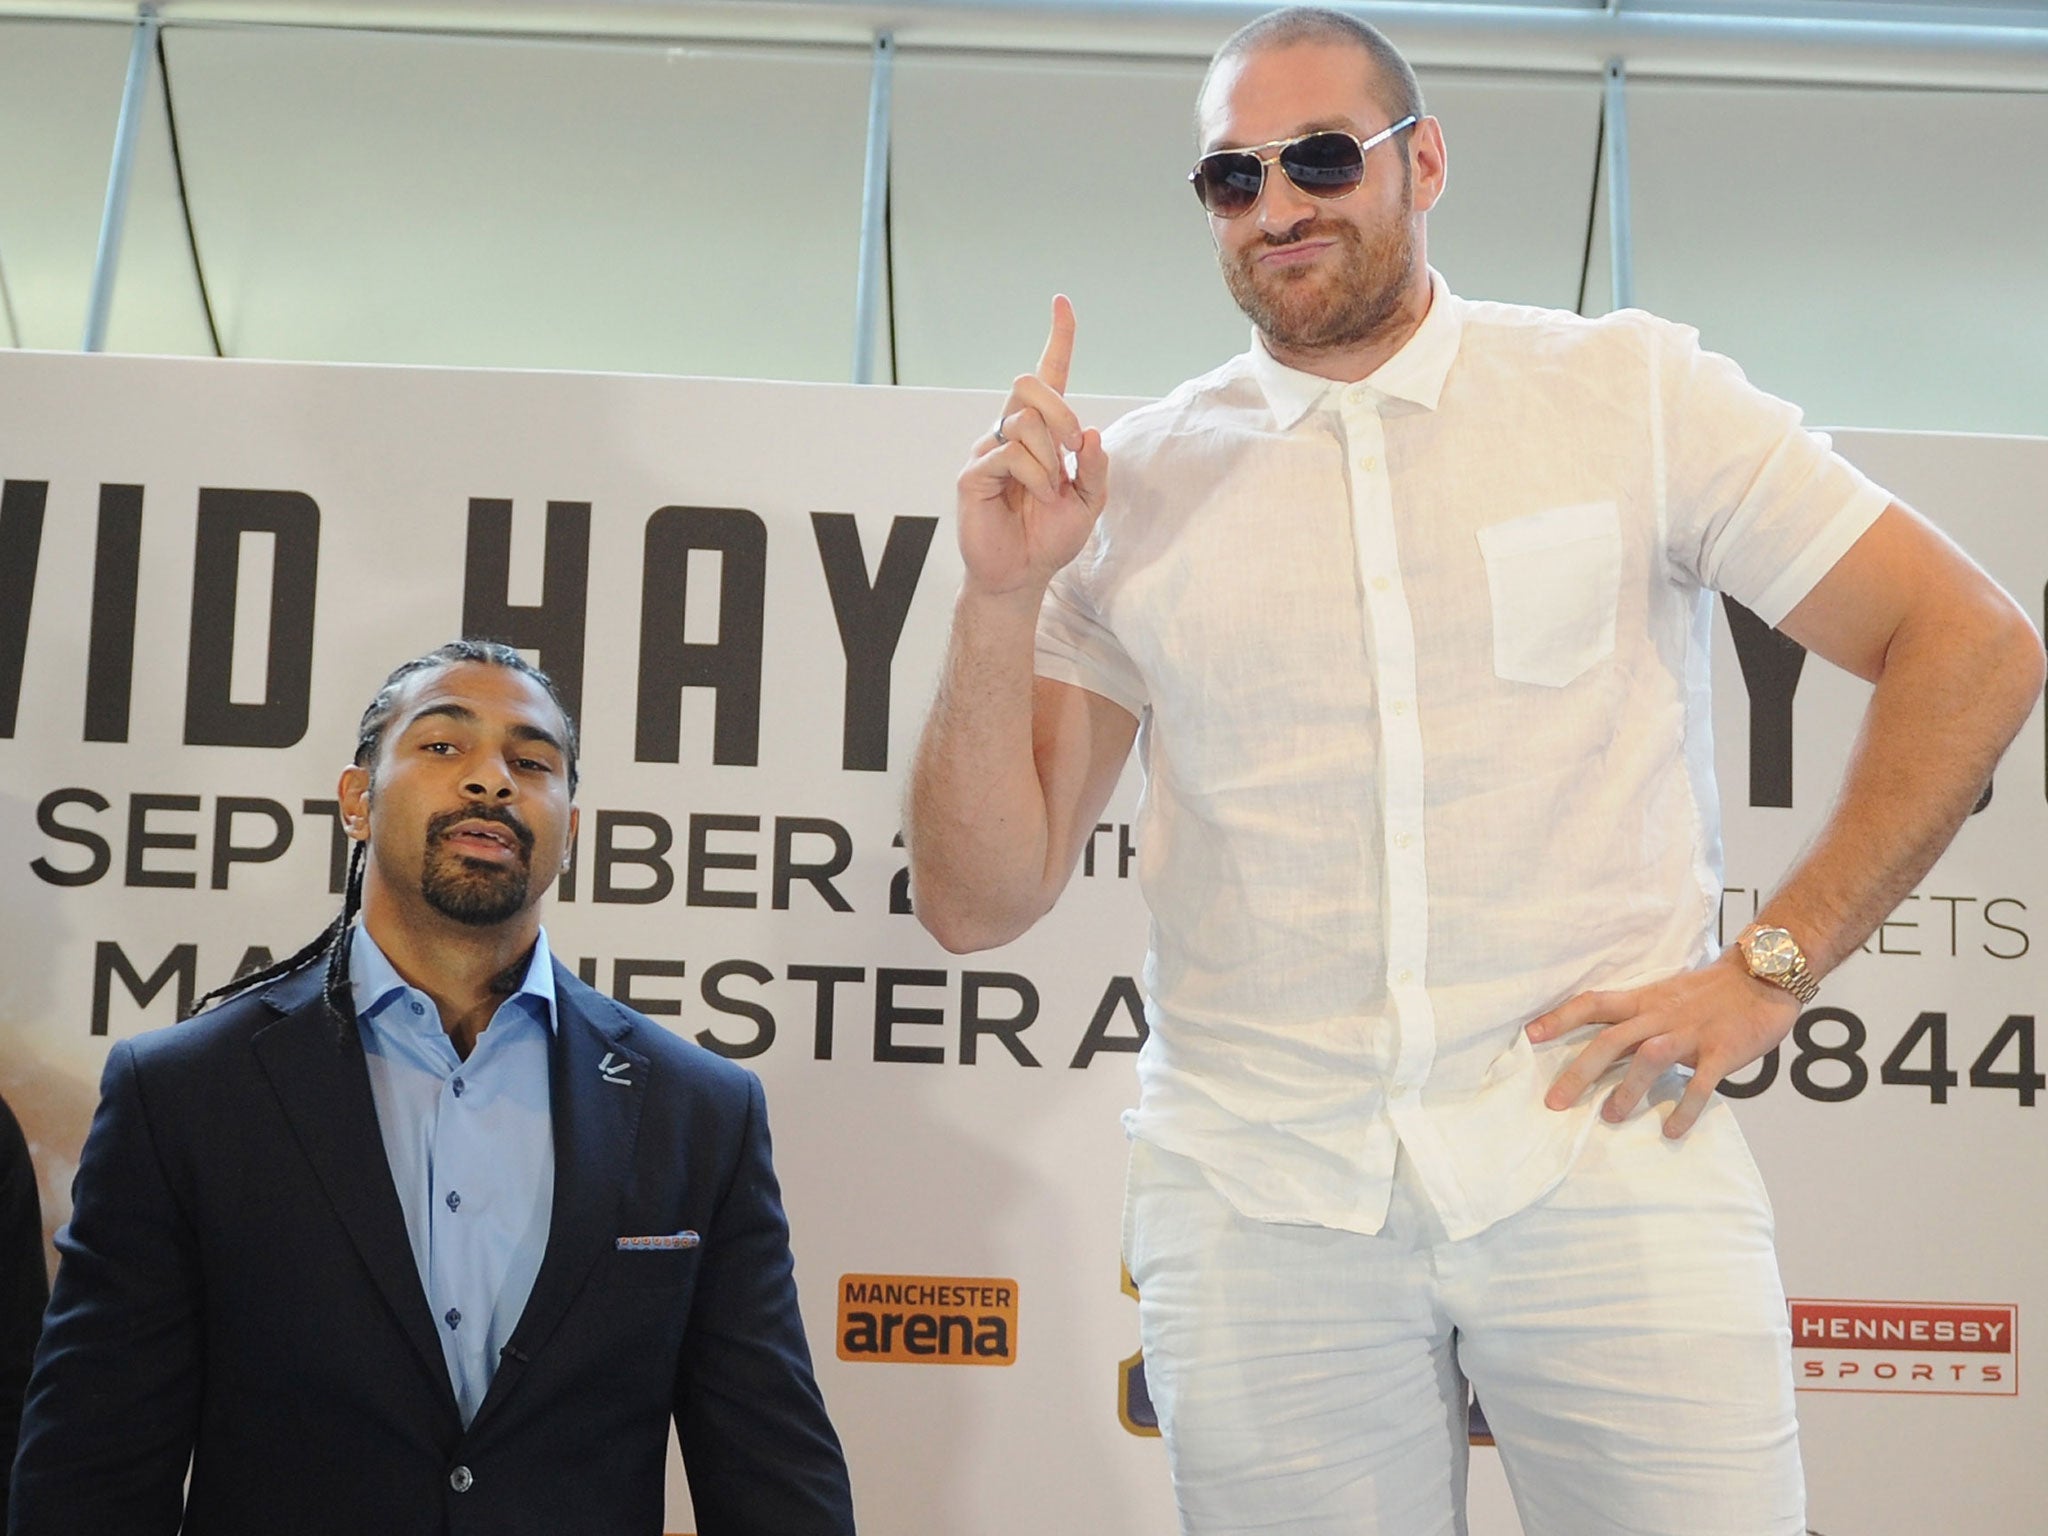 Chair devil: David Haye (left) and Tyson Fury engage in verbal sparring ahead of their meeting in September